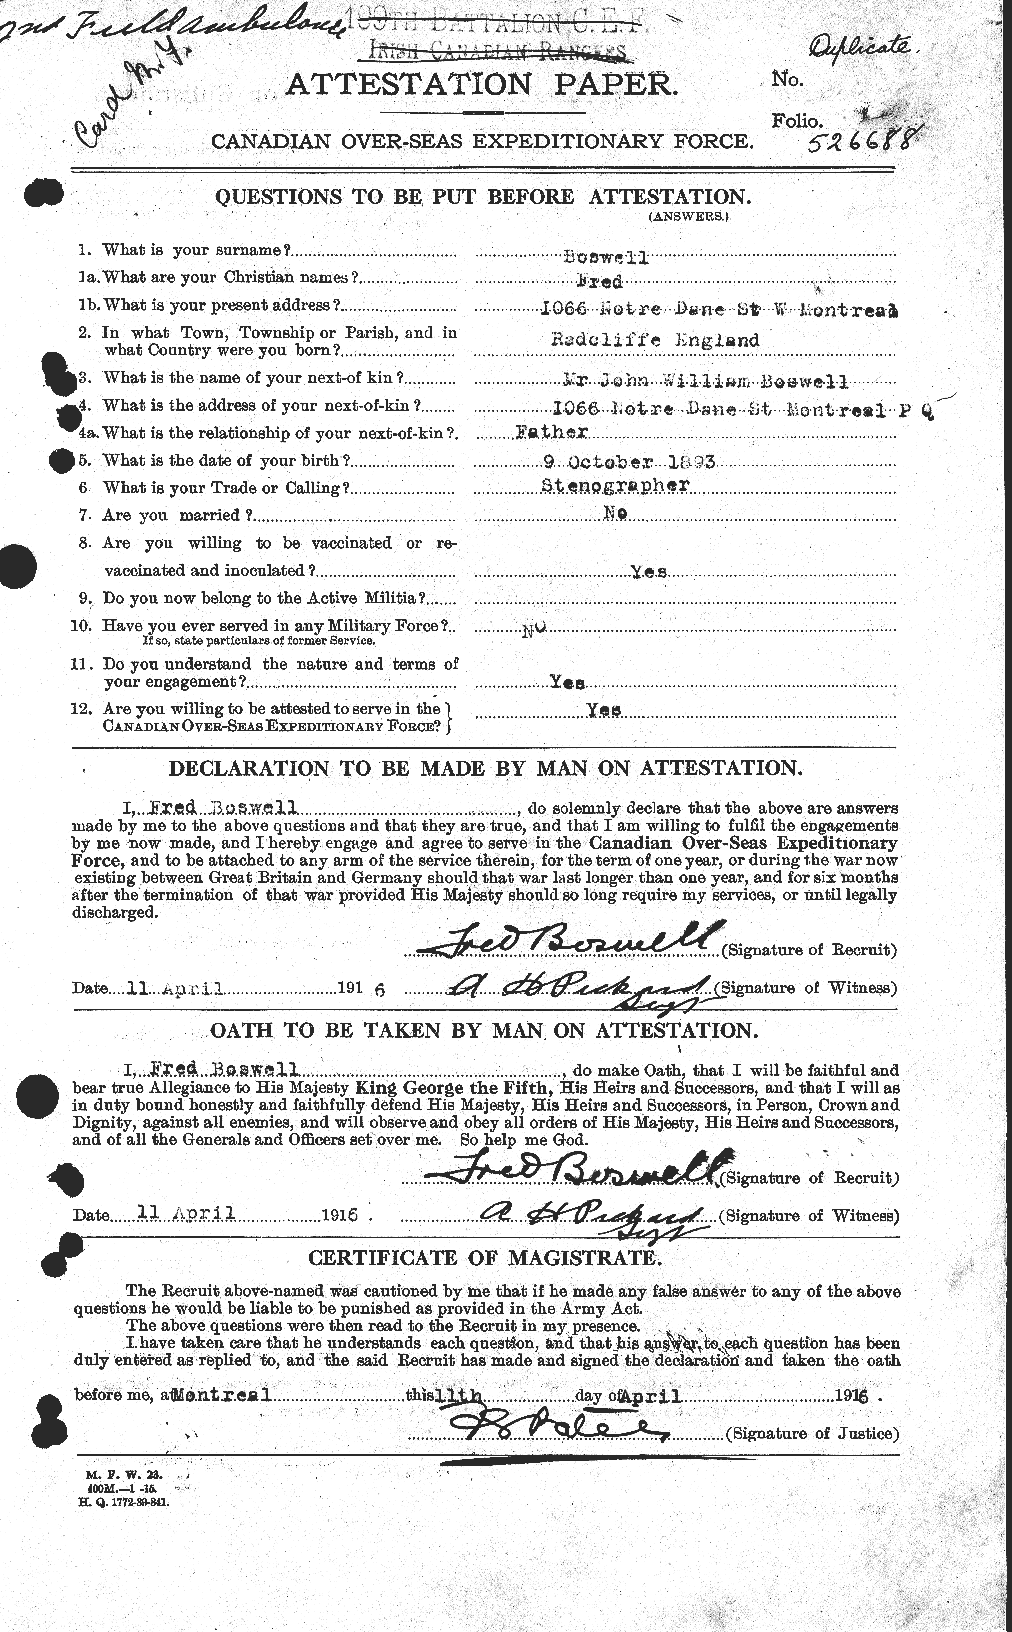 Personnel Records of the First World War - CEF 251924a